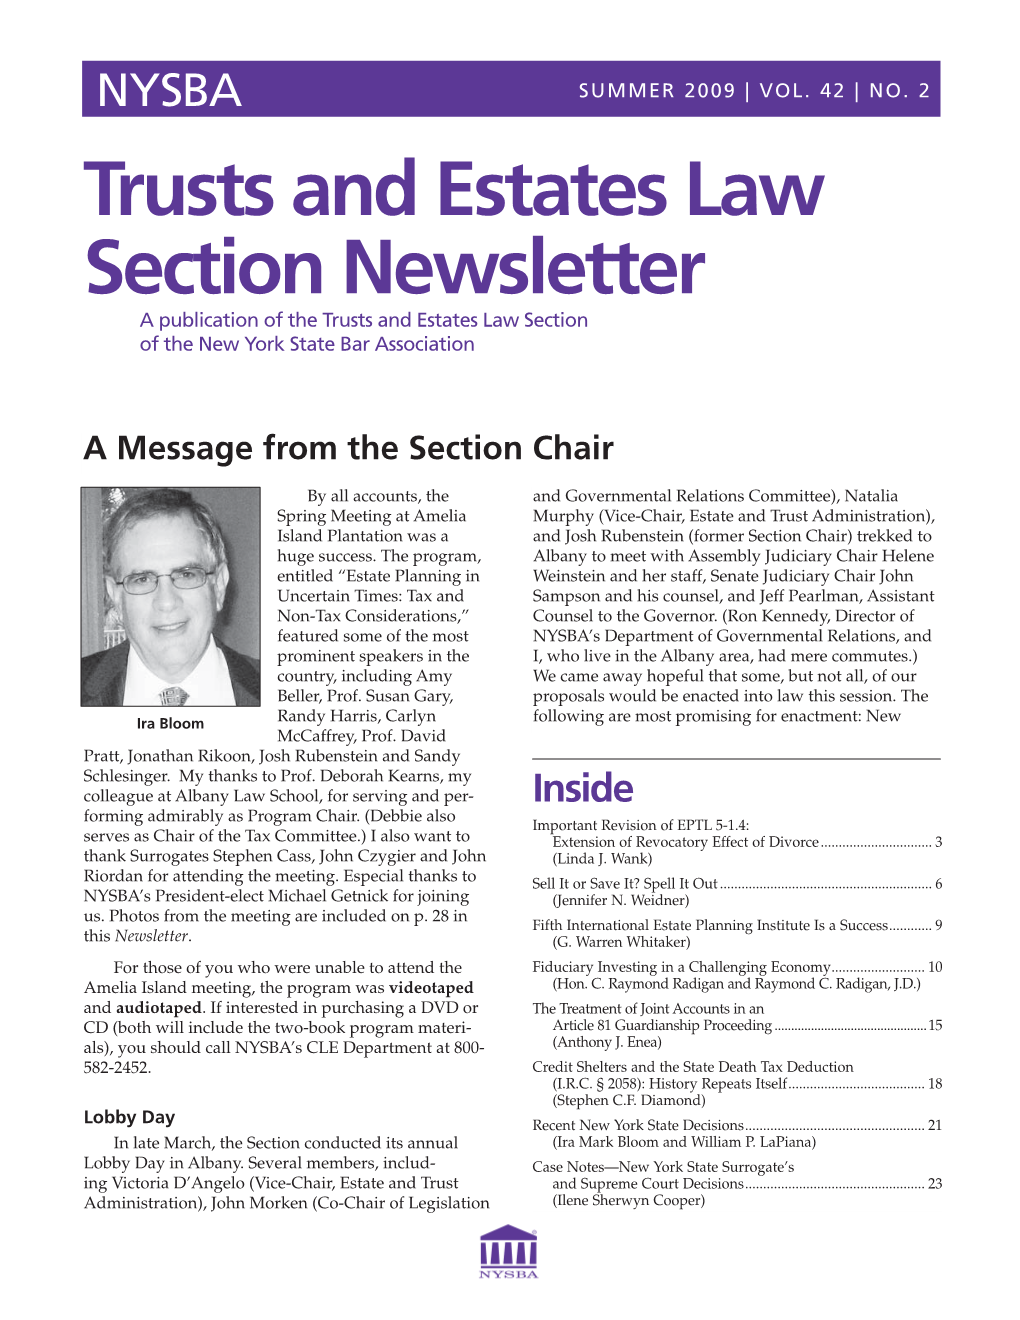 Trusts and Estates Law Section Newsletter a Publication of the Trusts and Estates Law Section of the New York State Bar Association